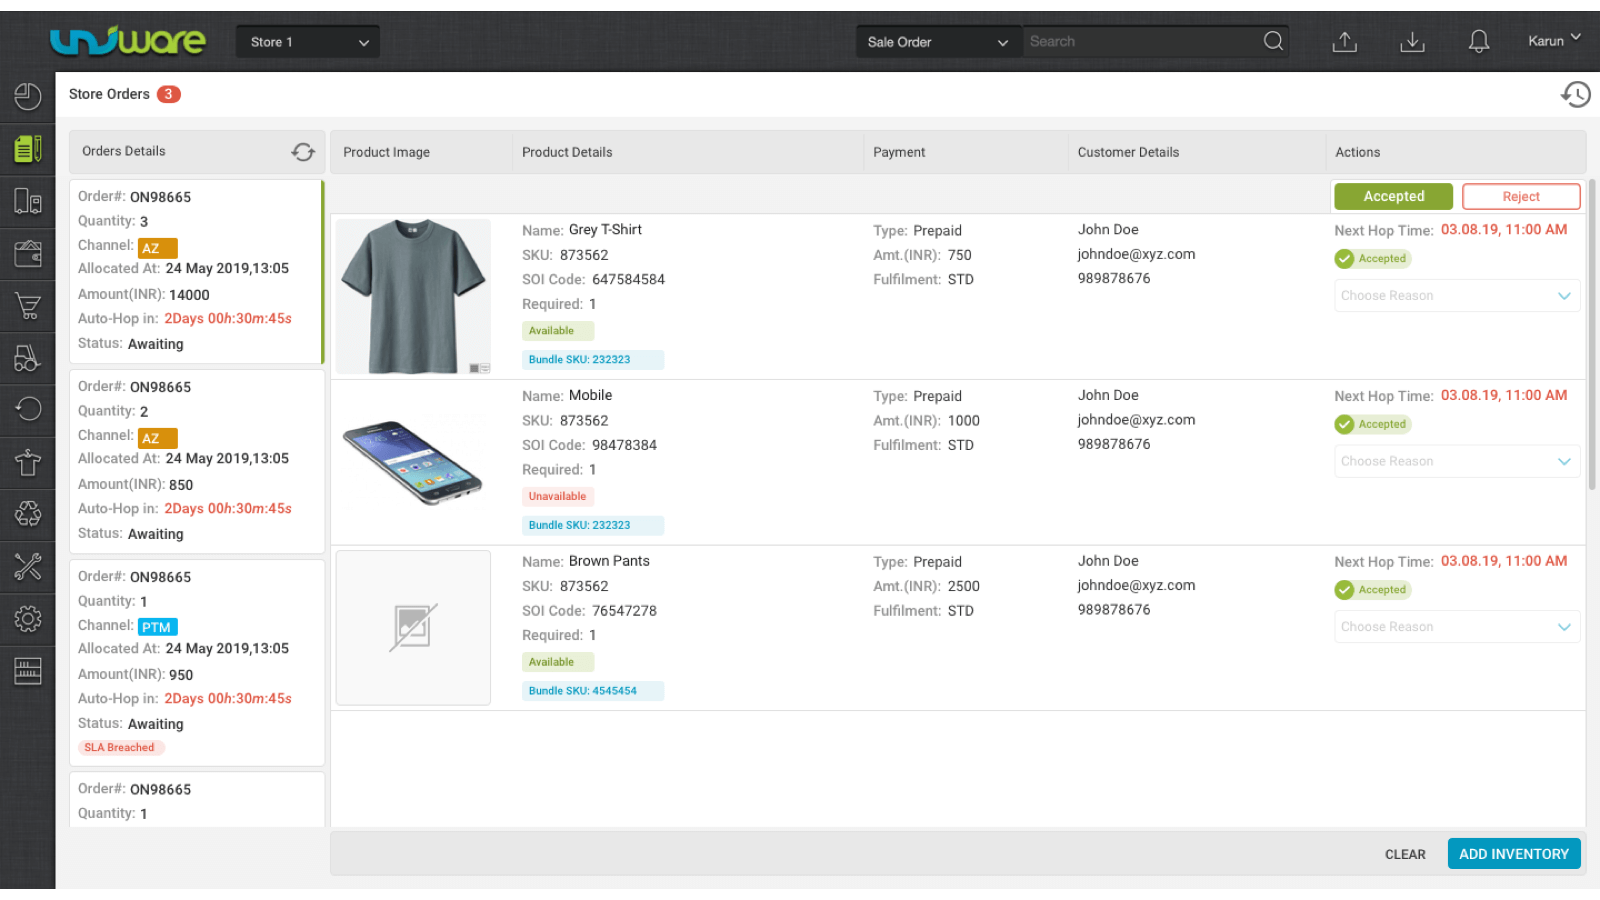 Multi-Channel Sales Order & Inventory Management shopify app